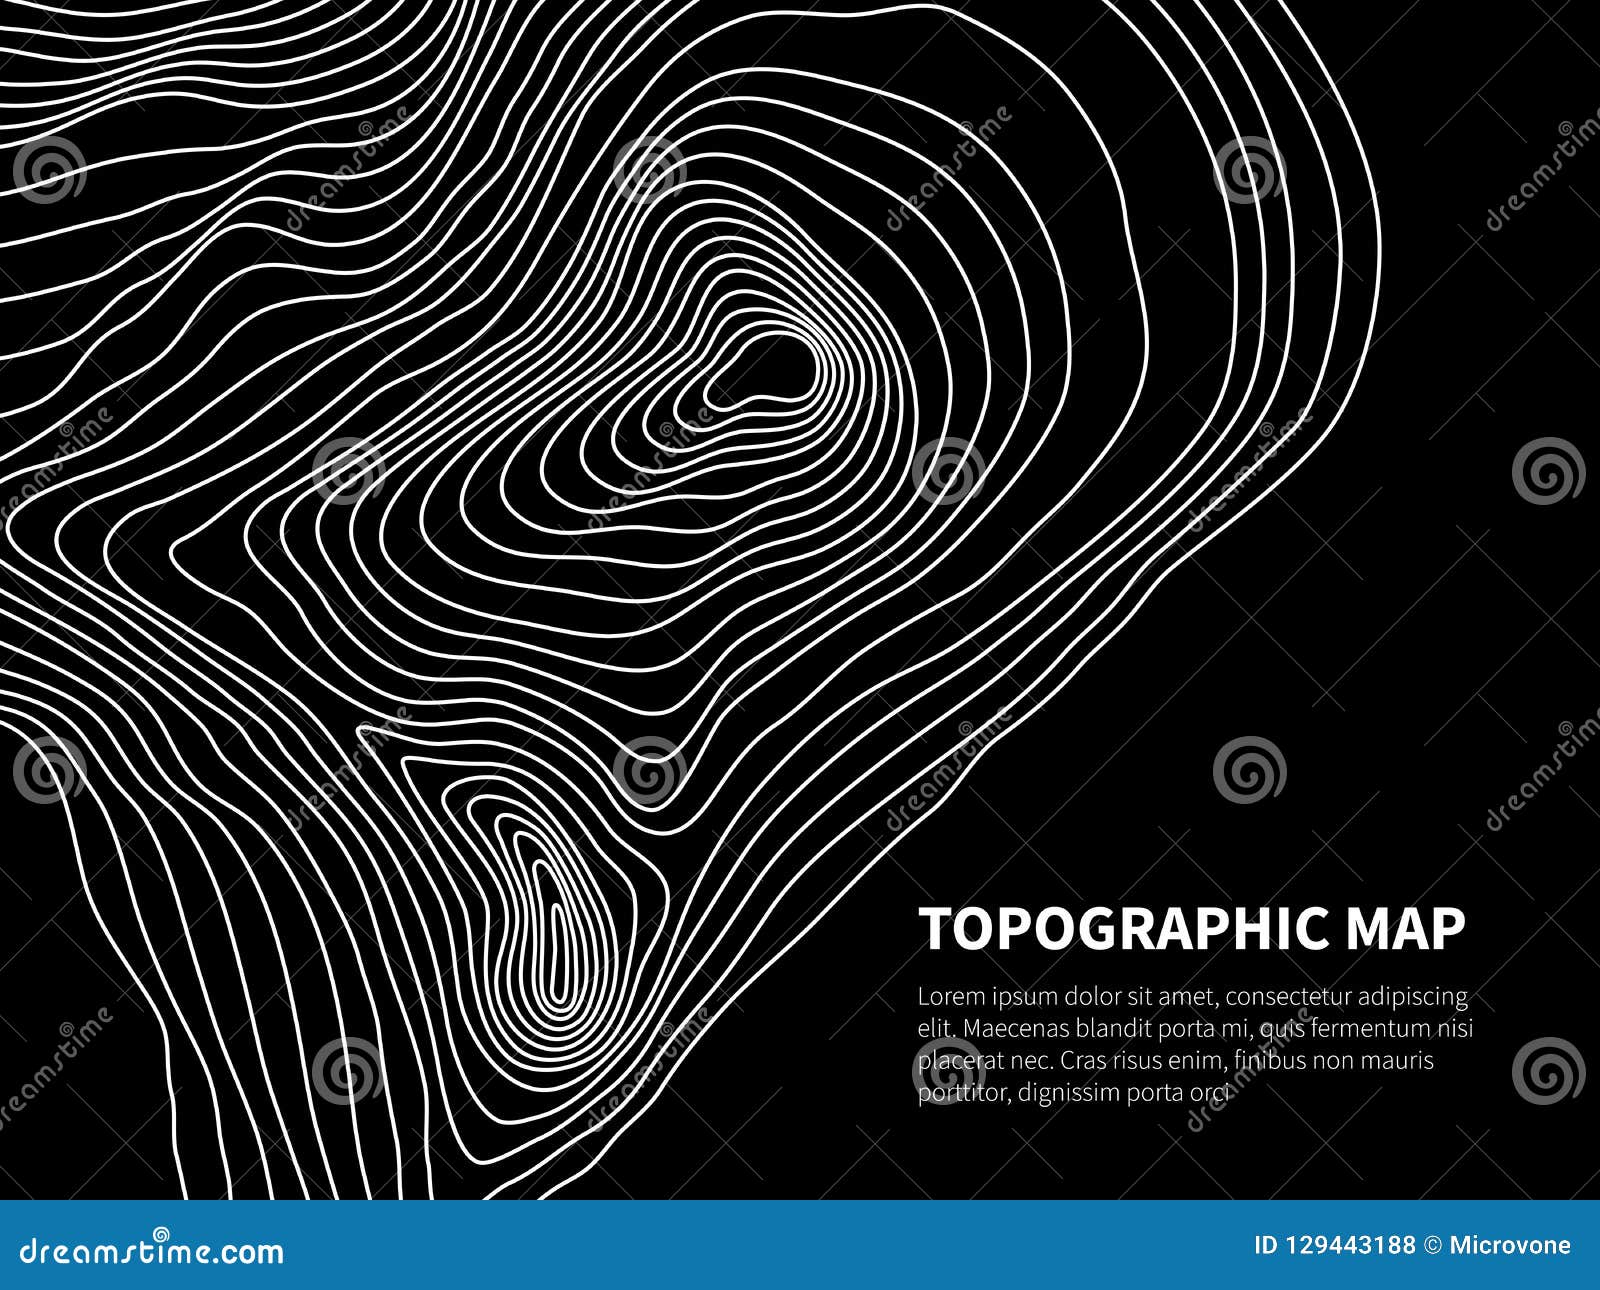 contour map. cartography line relief graphic  geometric background